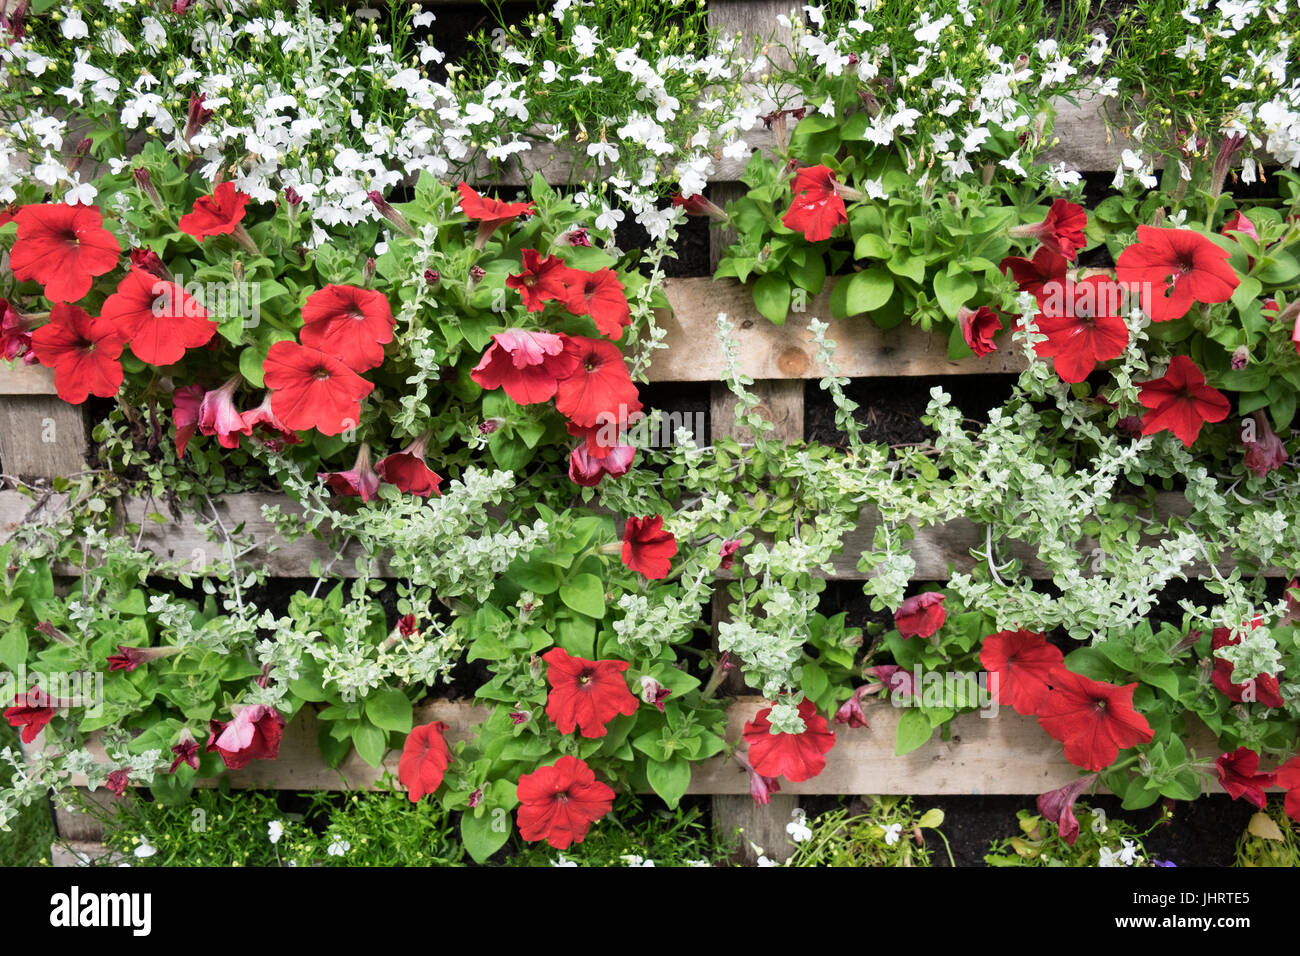 Trailing plants grown in recycled pallet container Stock Photo